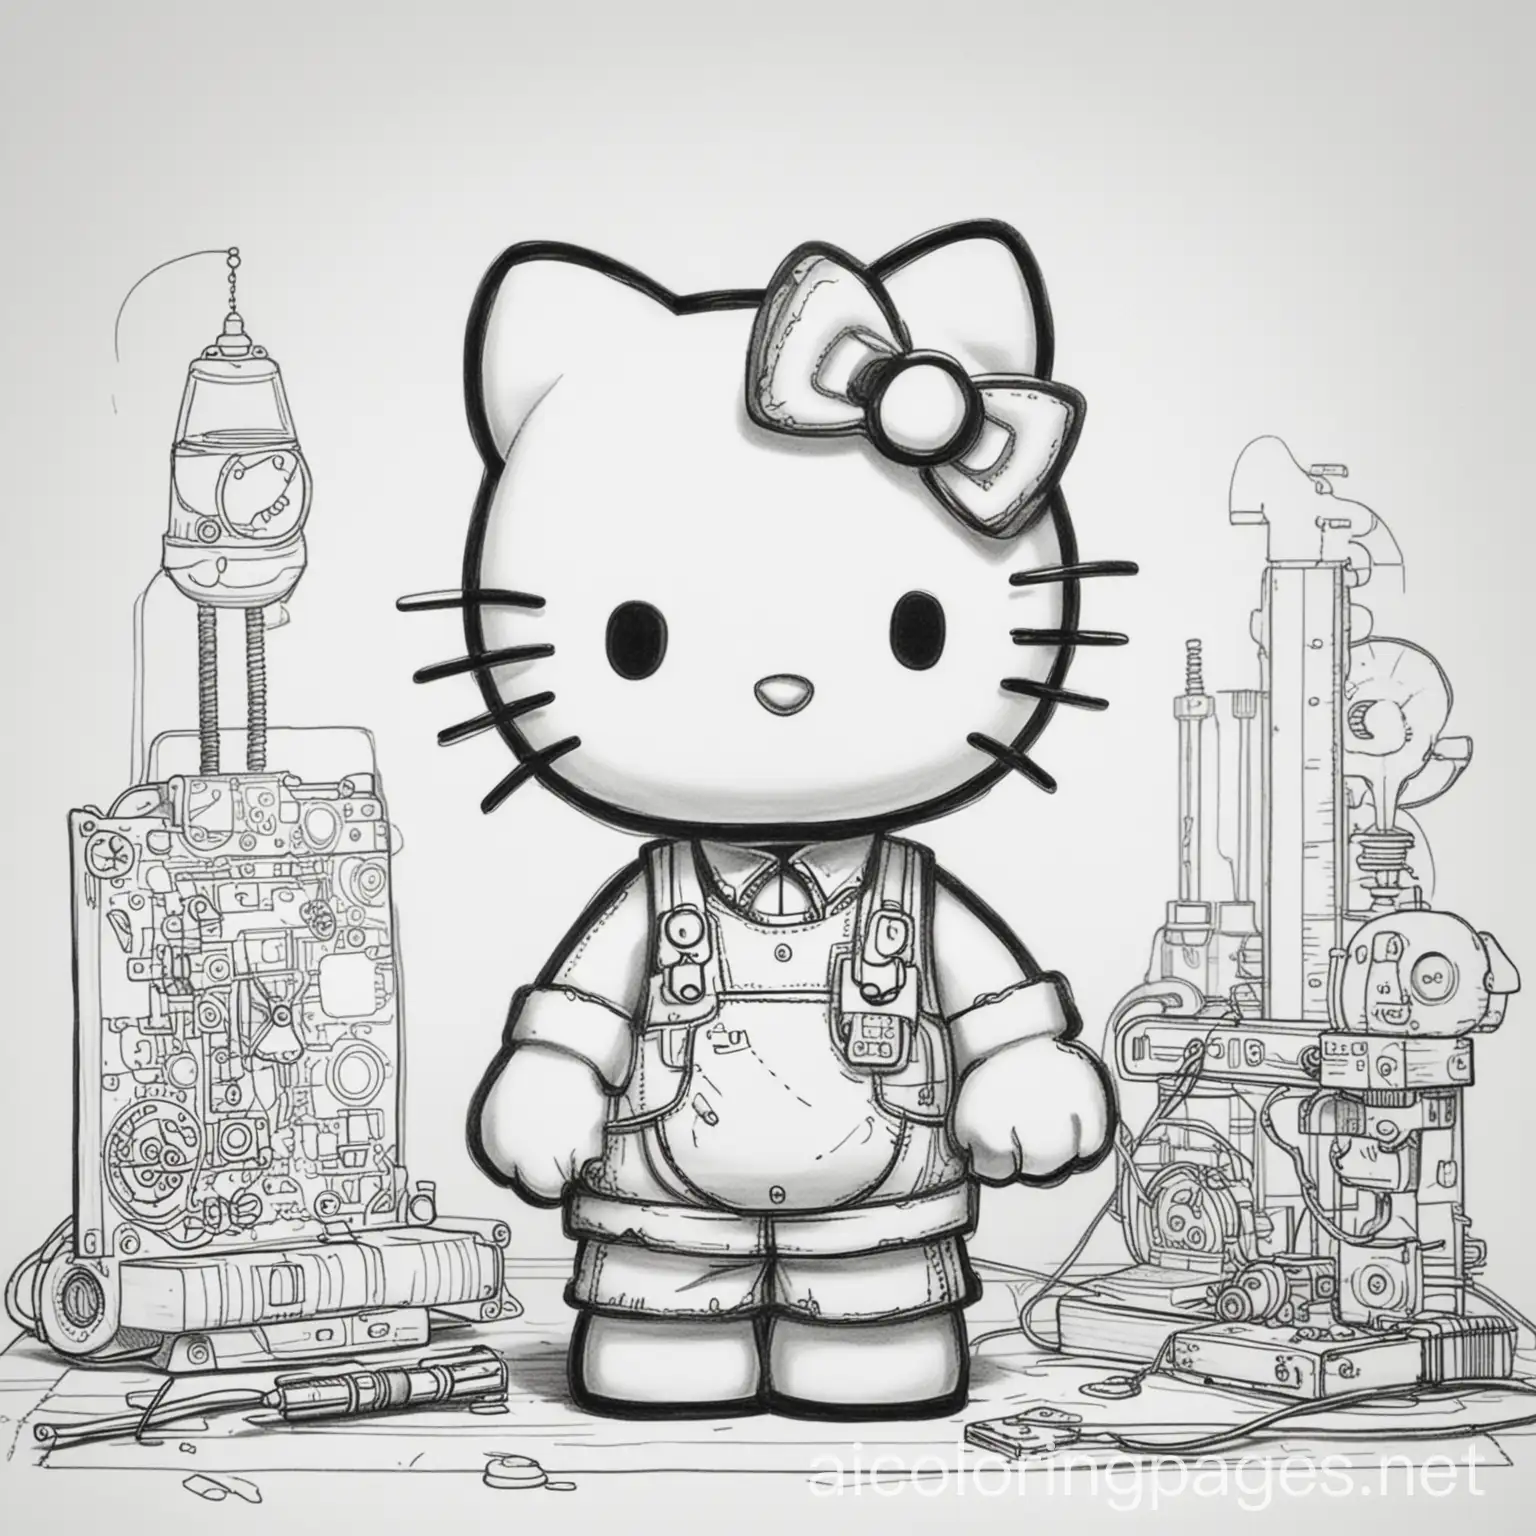 hello kitty as an inventor, Coloring Page, black and white, line art, white background, Simplicity, Ample White Space. The background of the coloring page is plain white to make it easy for young children to color within the lines. The outlines of all the subjects are easy to distinguish, making it simple for kids to color without too much difficulty